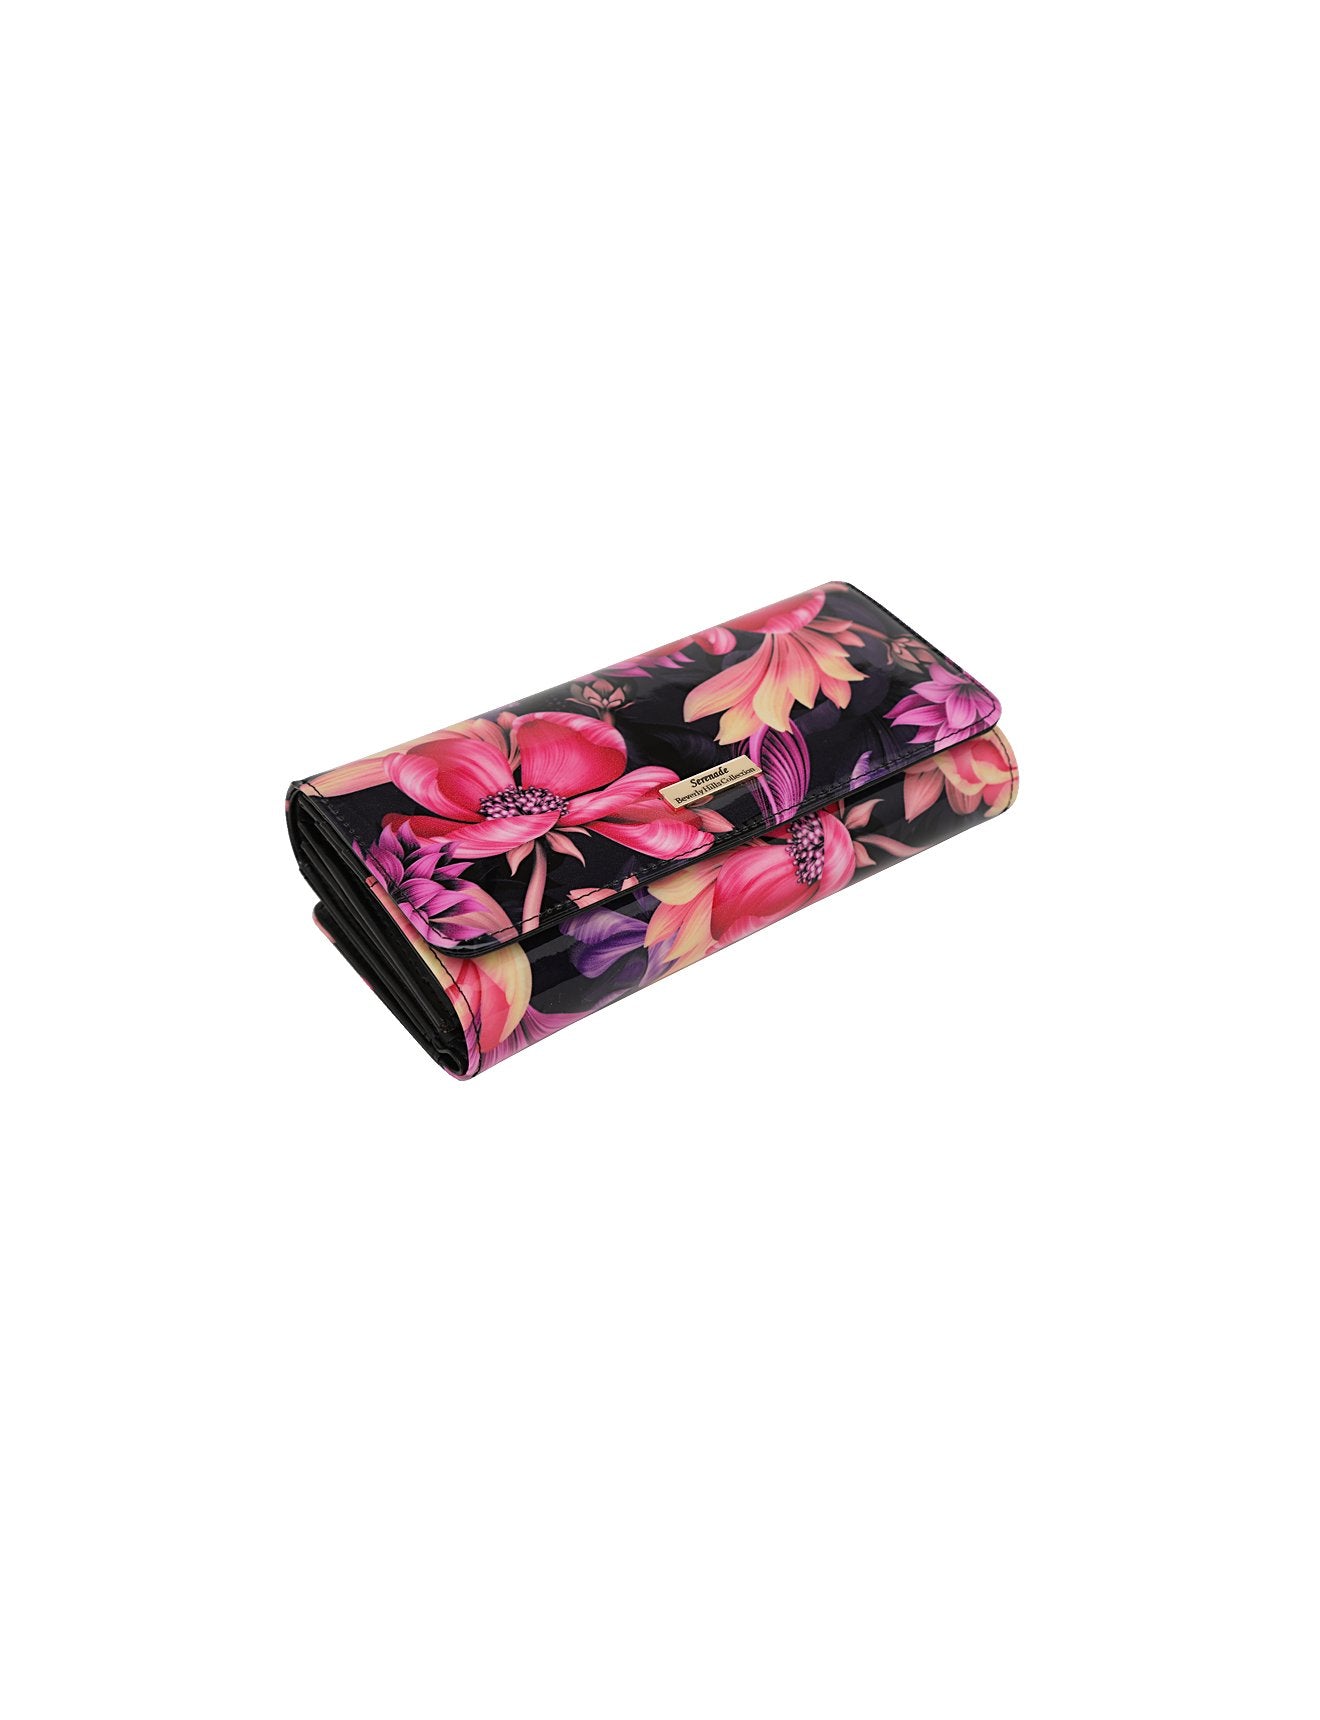 Serenade - Cynthia WSN-2601 RFID Protected Large Leather Wallet - Floral-5